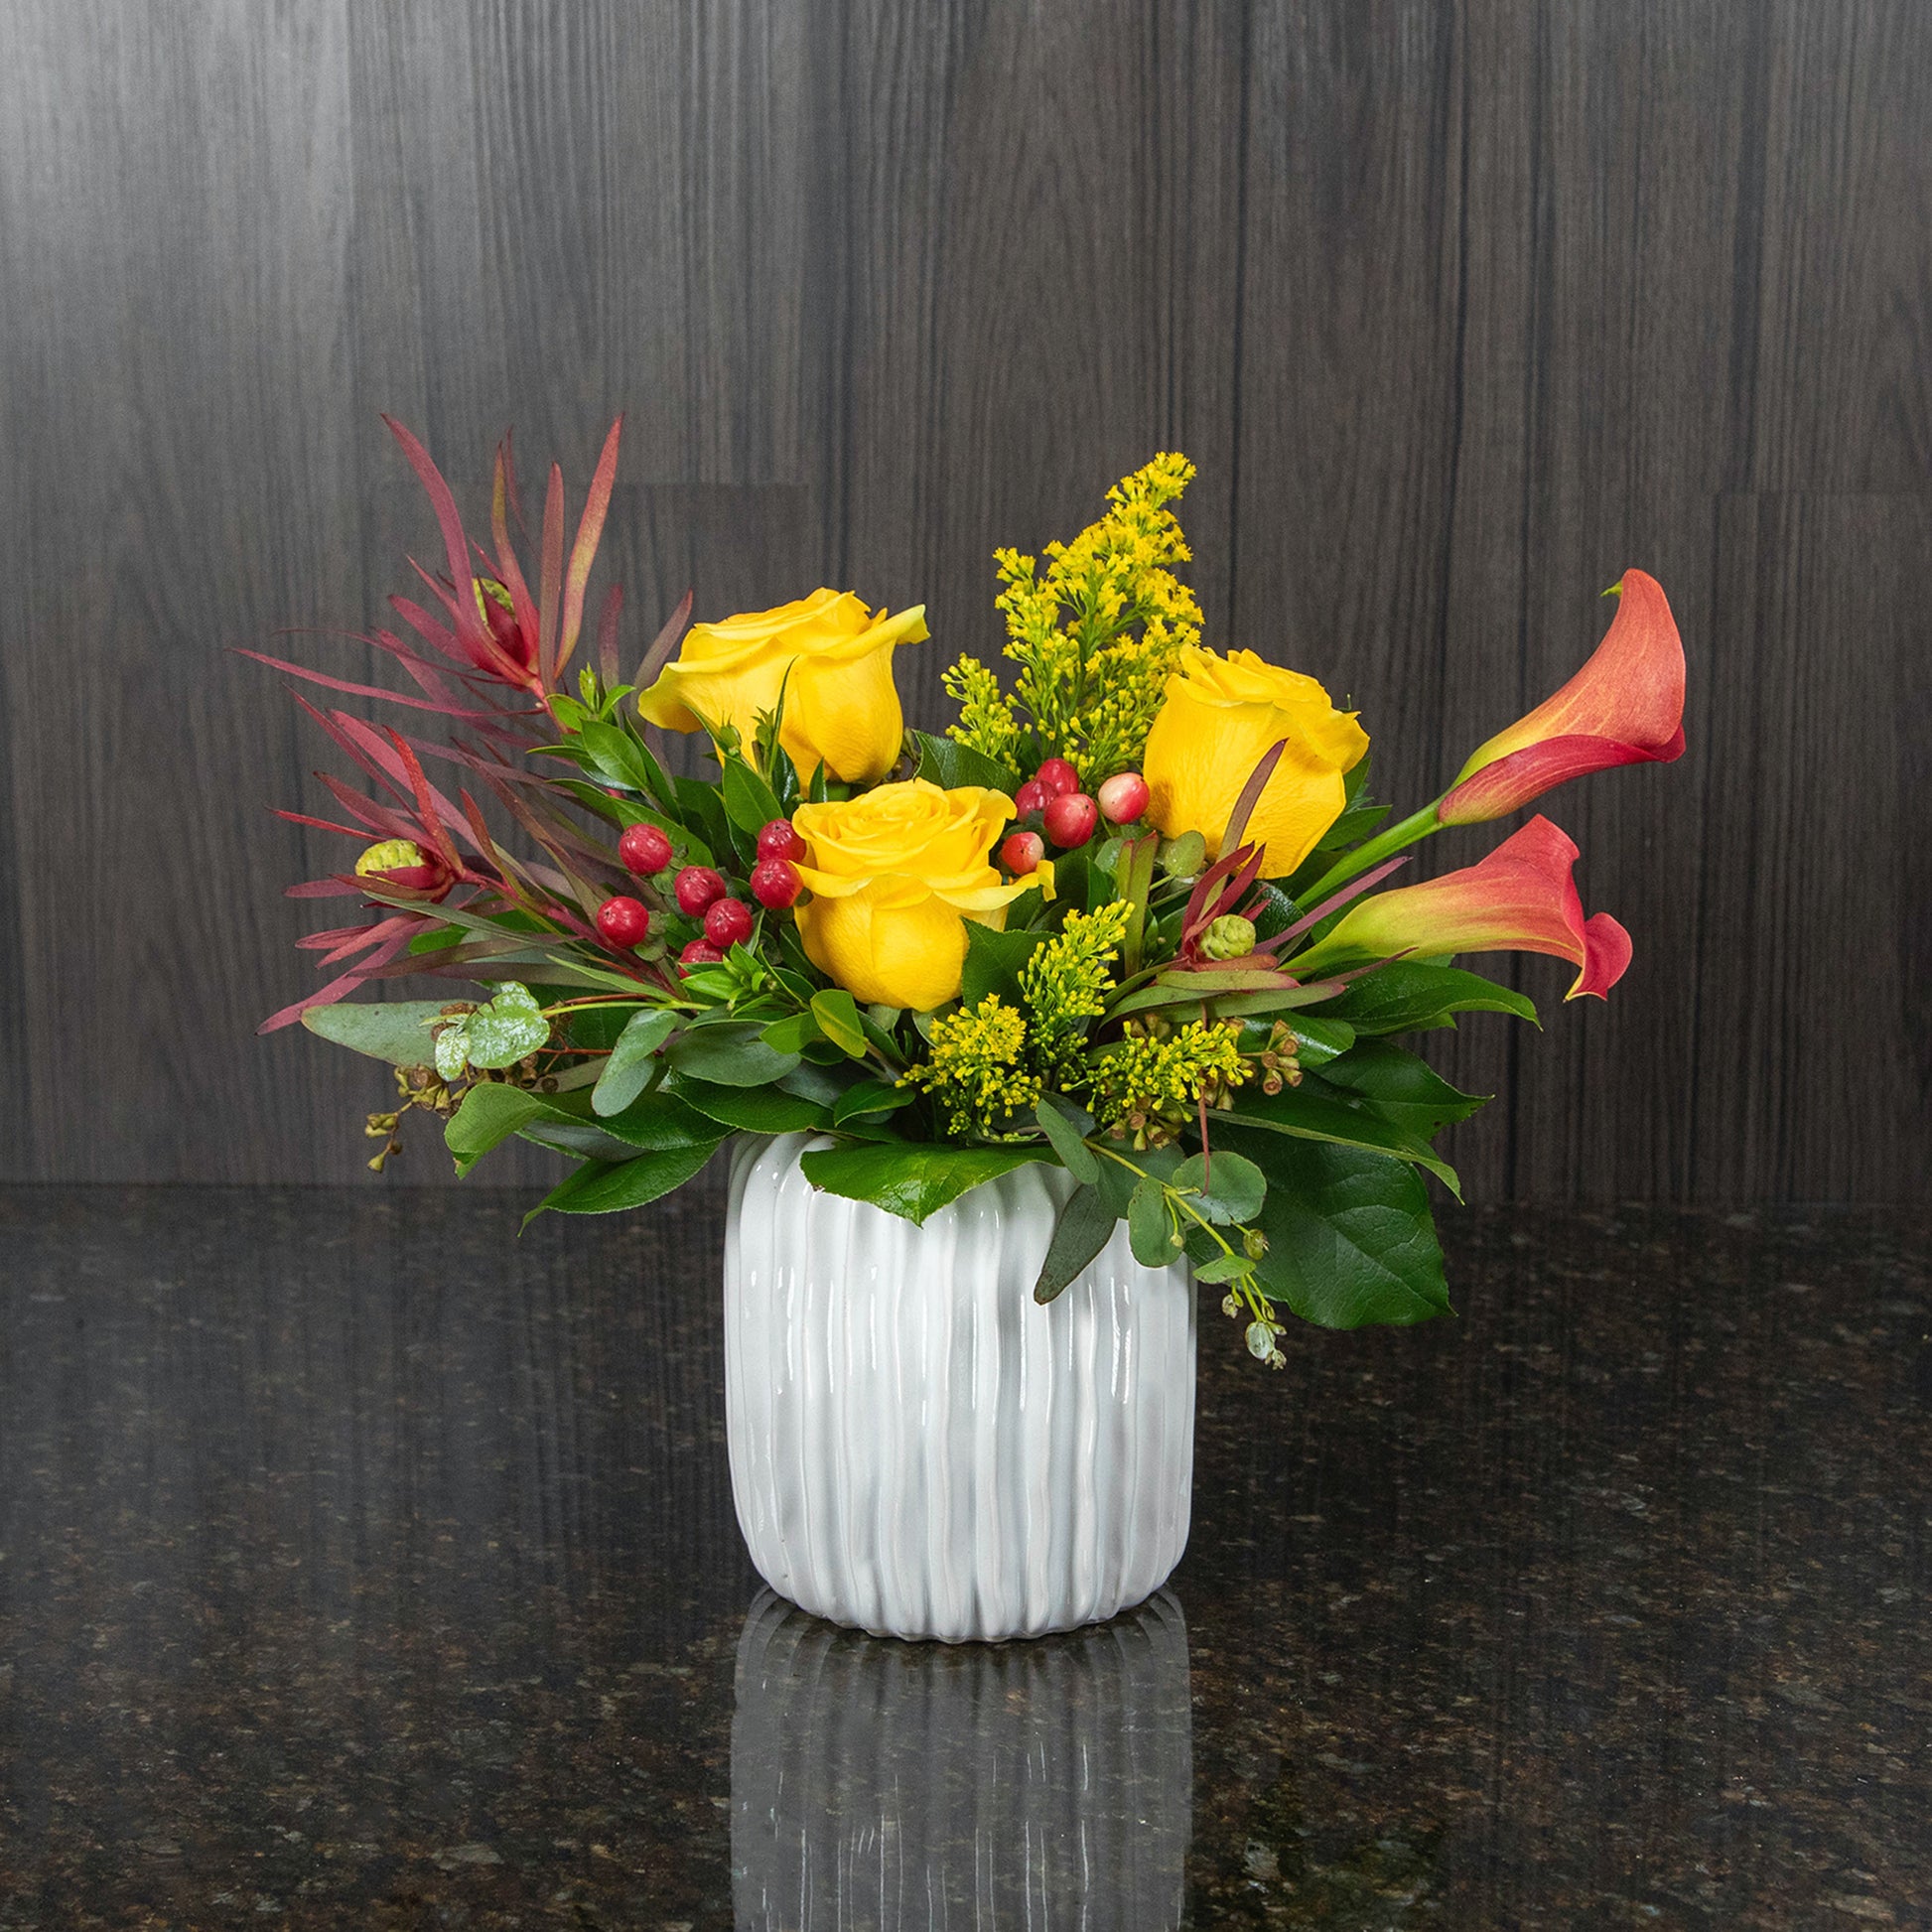 a flower arrangement in shades of yellow, red, and orange in a textured white pot